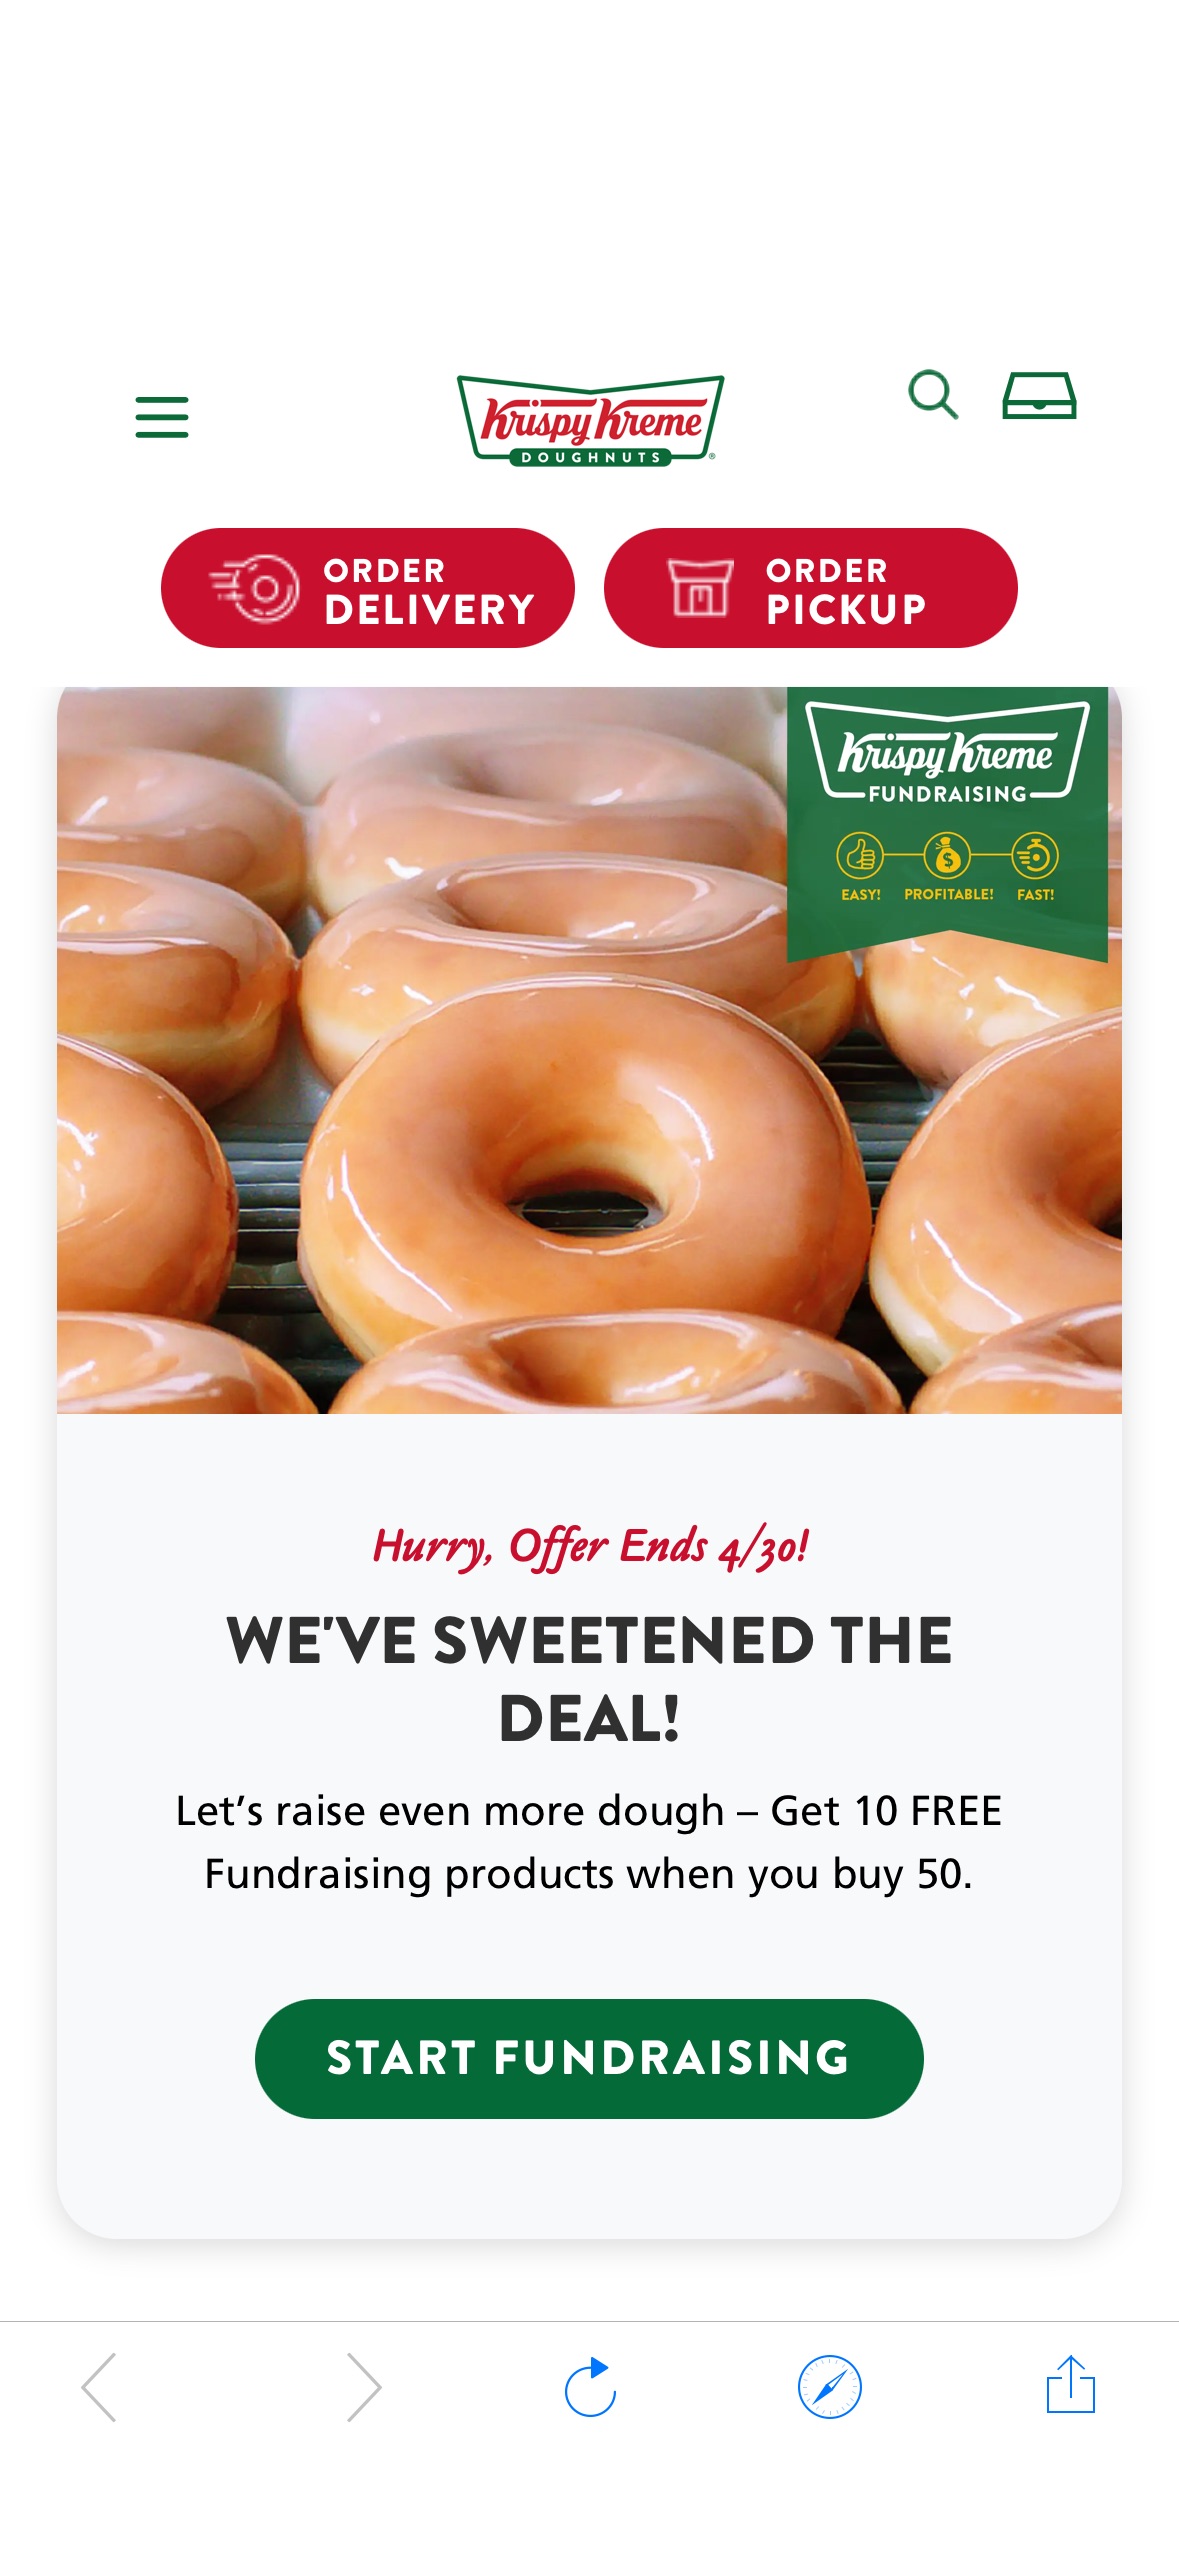 Today, April 19th only, head over to your local Krispy Kreme shop and score a free doughnut. All you have to do is show your friendship bracelet and grab the freebie. no purchase necessary!